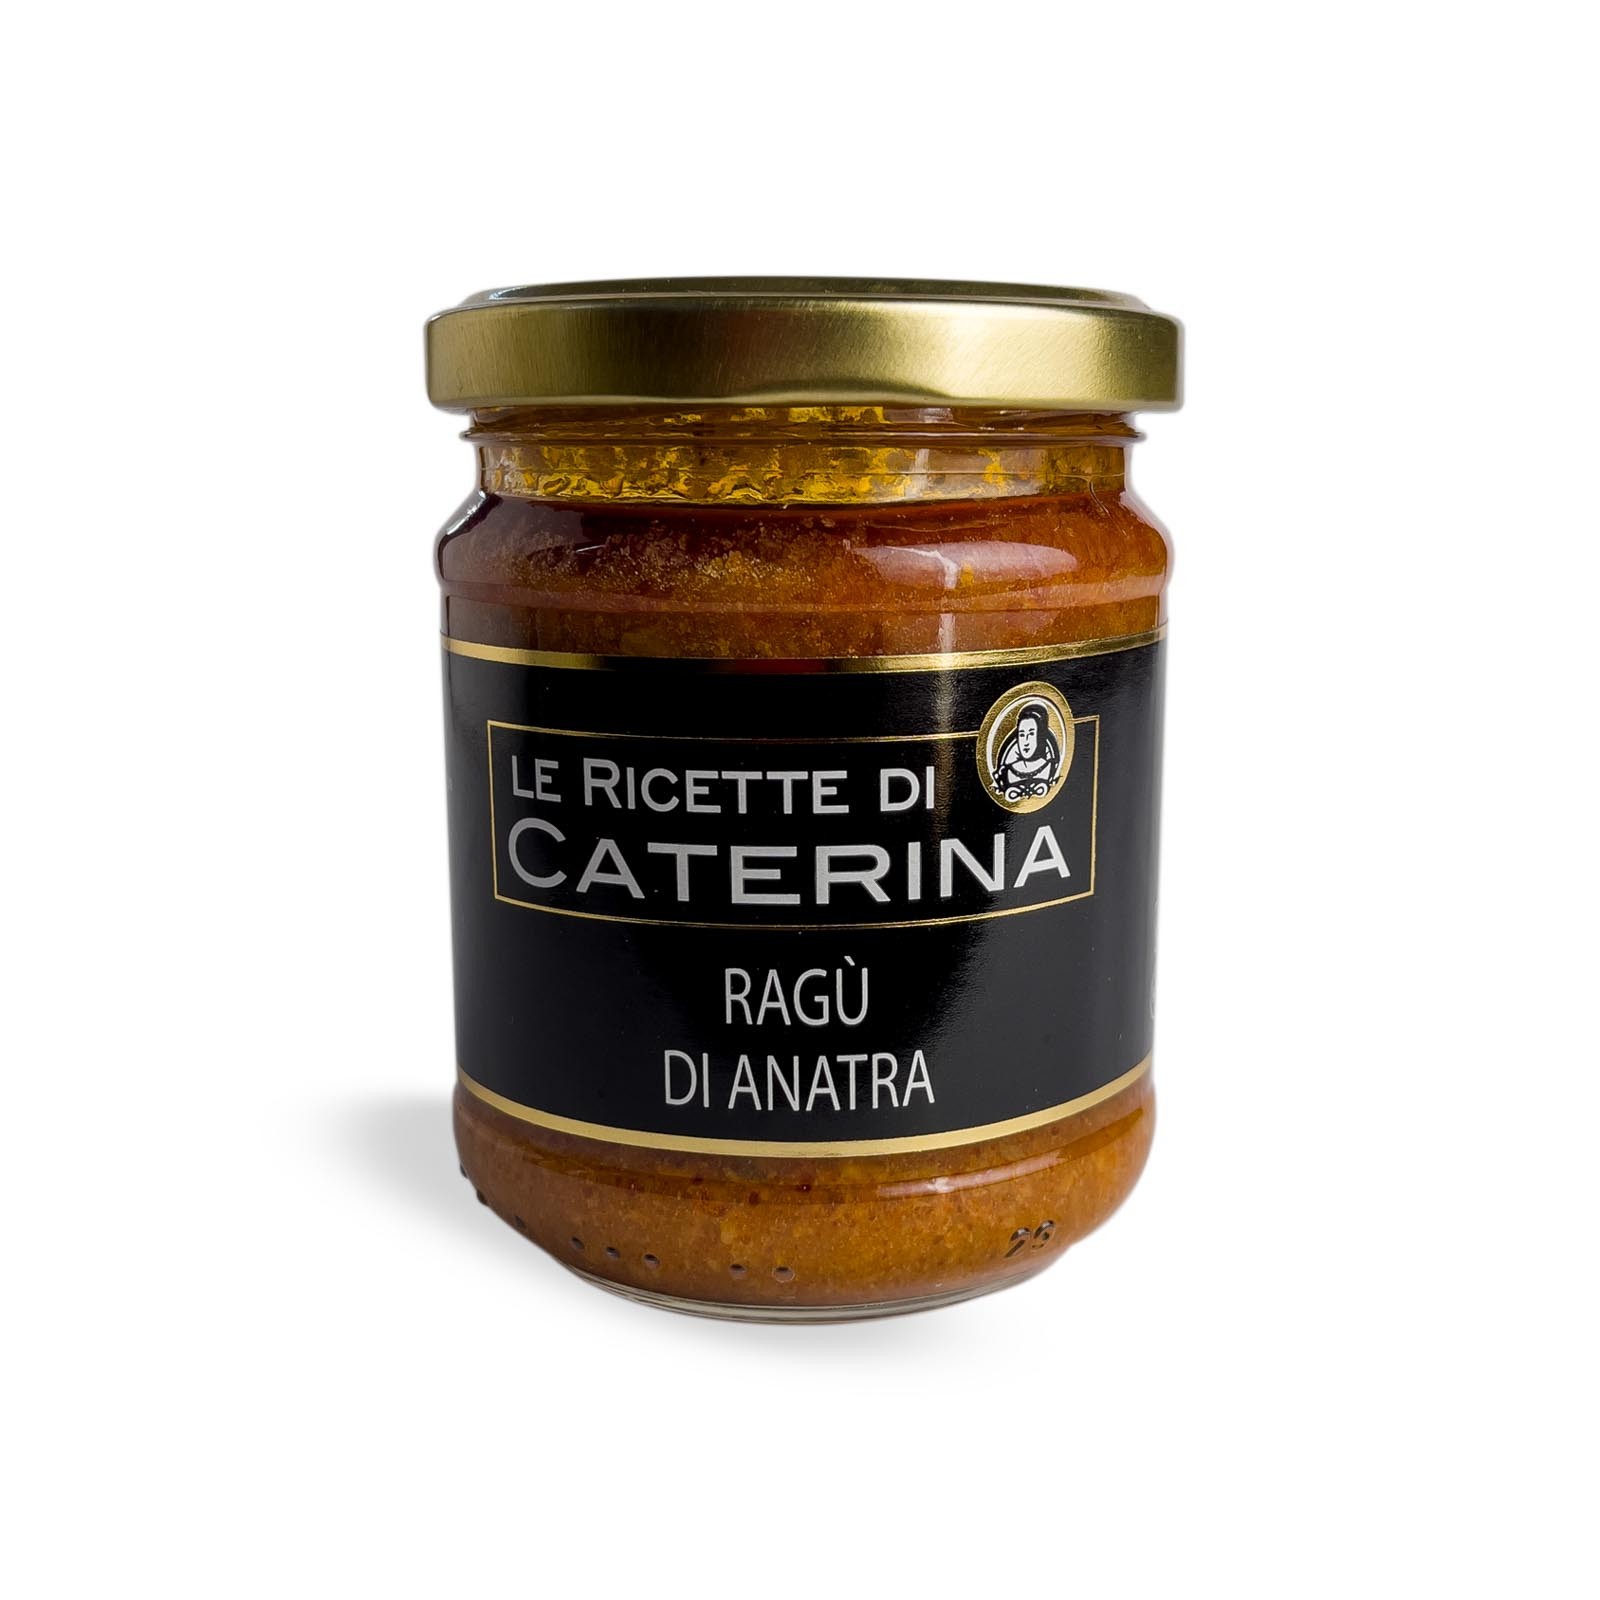 Artisan ragù with duck meat, produced according to an ancient Tuscan recipe.